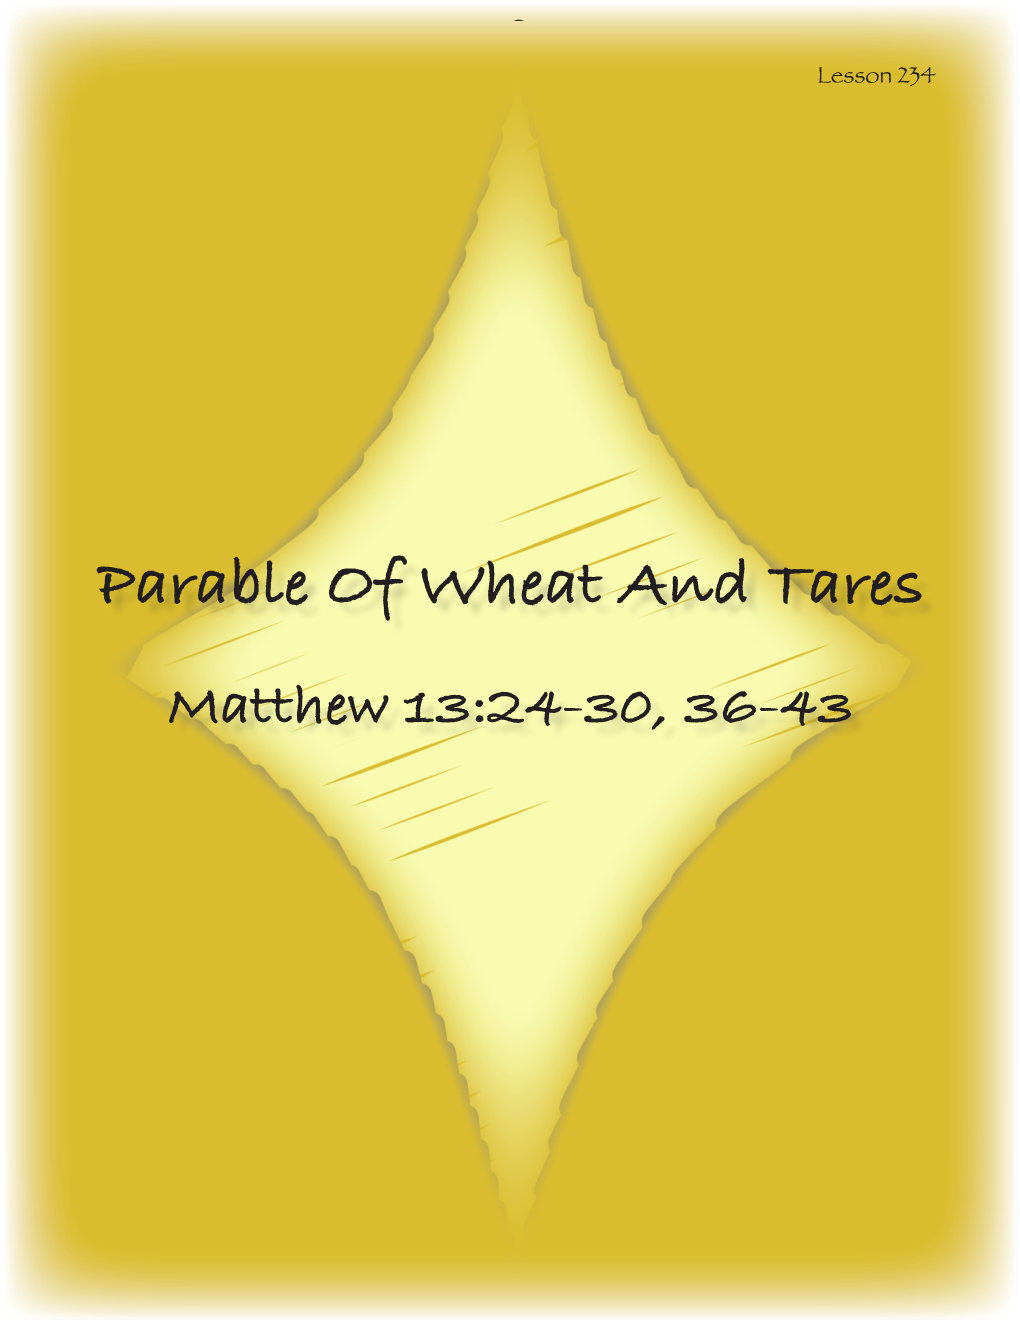 Parable of Wheat and Tares Matthew 13:24-30, 36-43 MEMORY VERSE MATTHEW 13:43 "Then the Righteous Will Shine Forth As the Sun in the Kingdom of Their Father